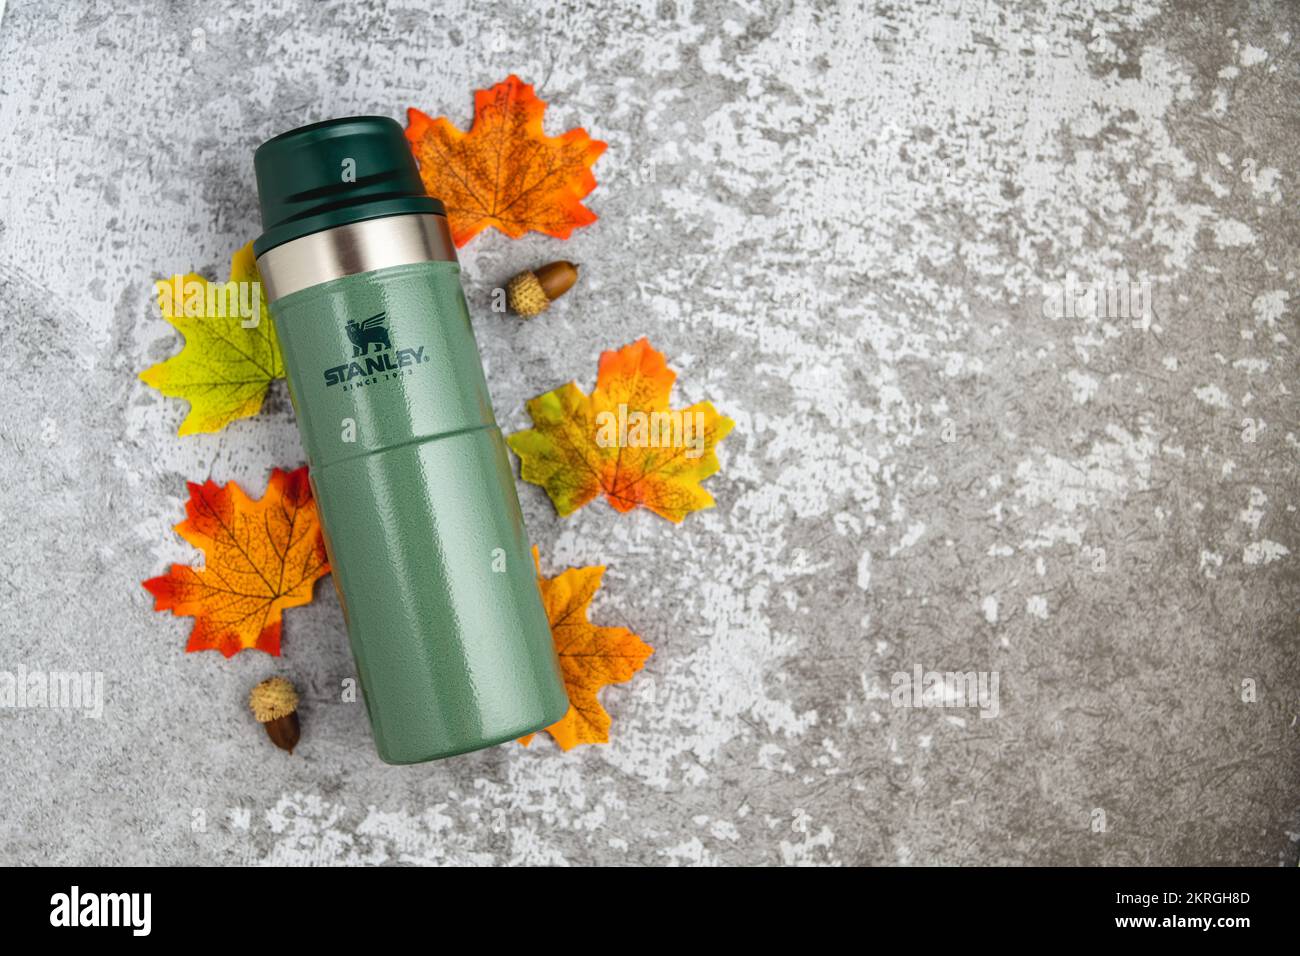 1,545 Pouring Coffee Tea Thermos Hiking Images, Stock Photos, 3D